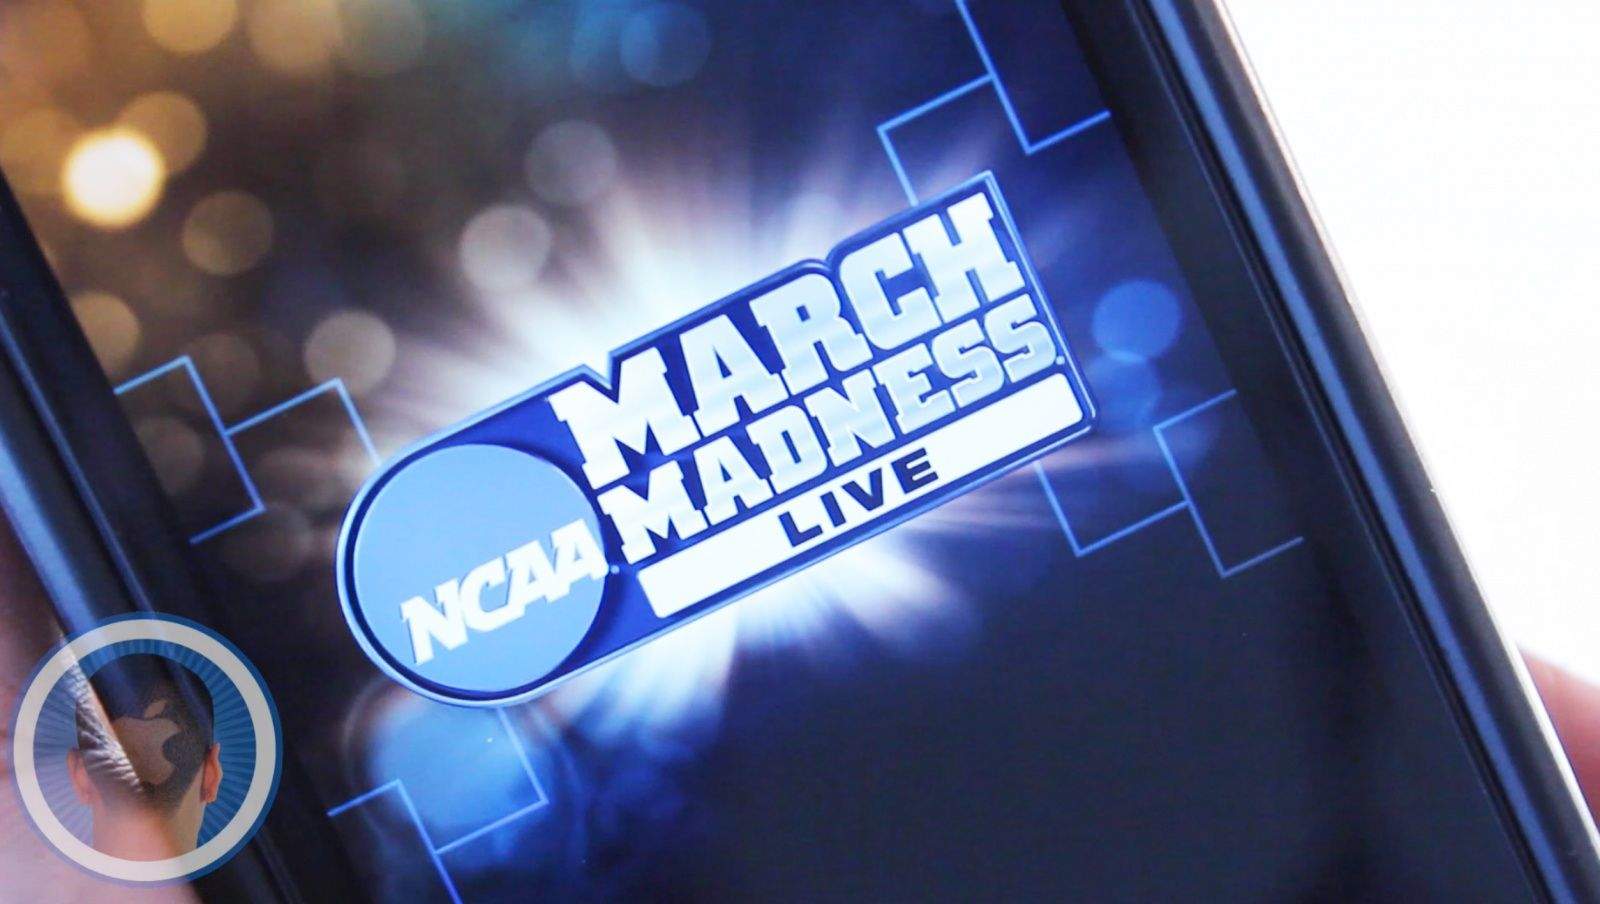 Apple TV is the home of March Madness.